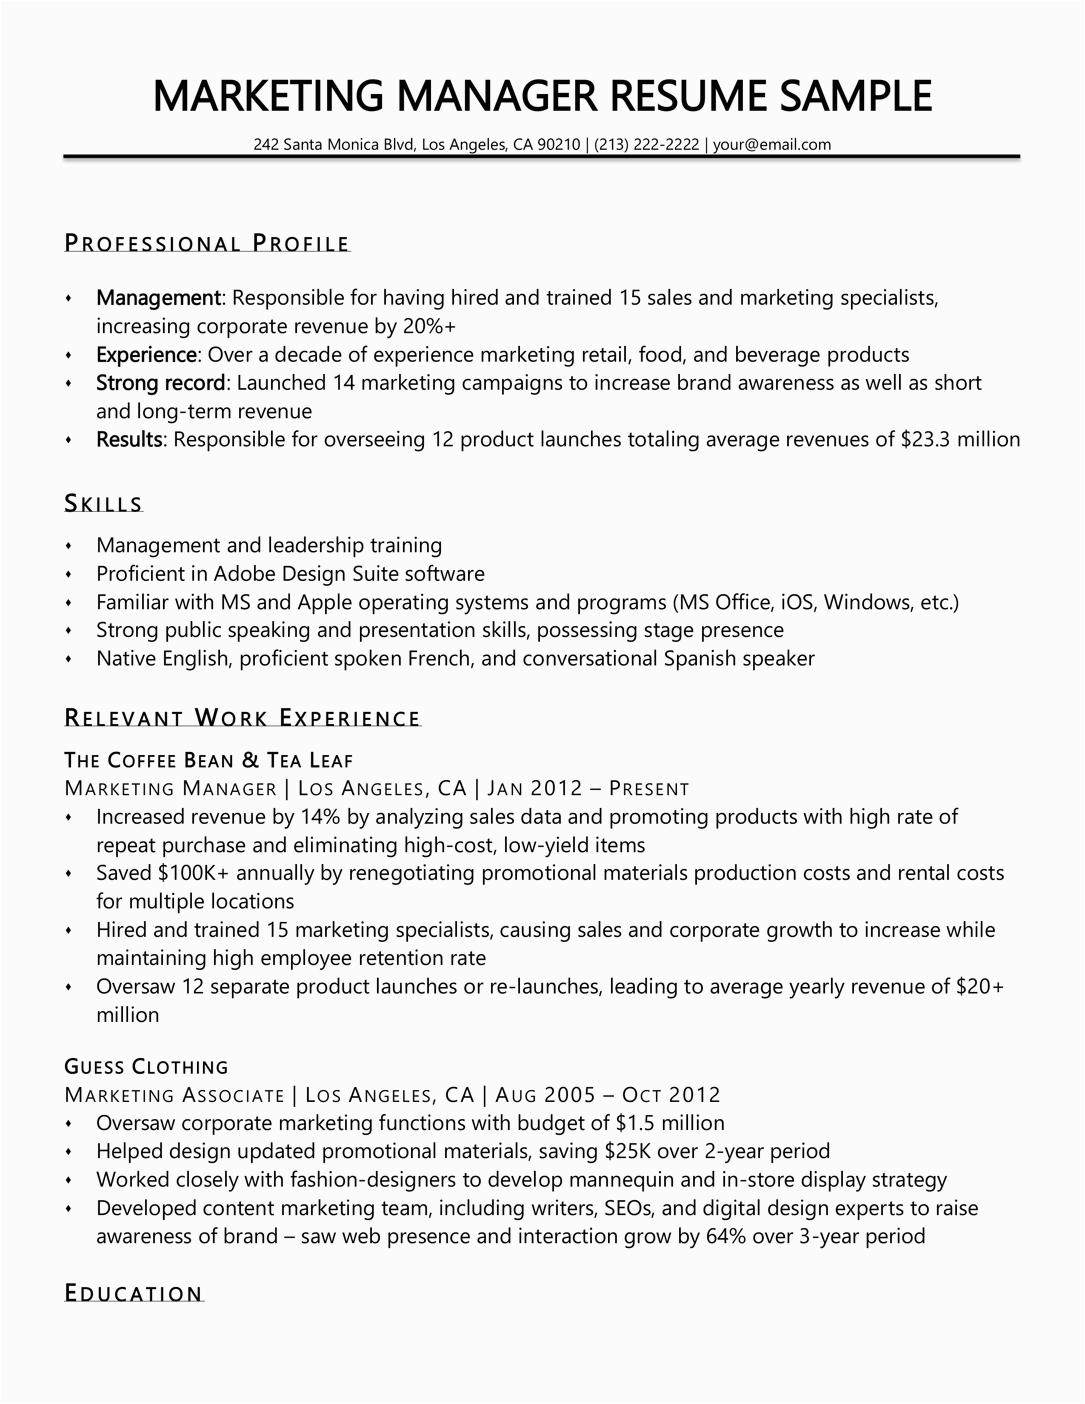 Sample Resume for Sales and Marketing Manager Marketing Manager Resume Sample